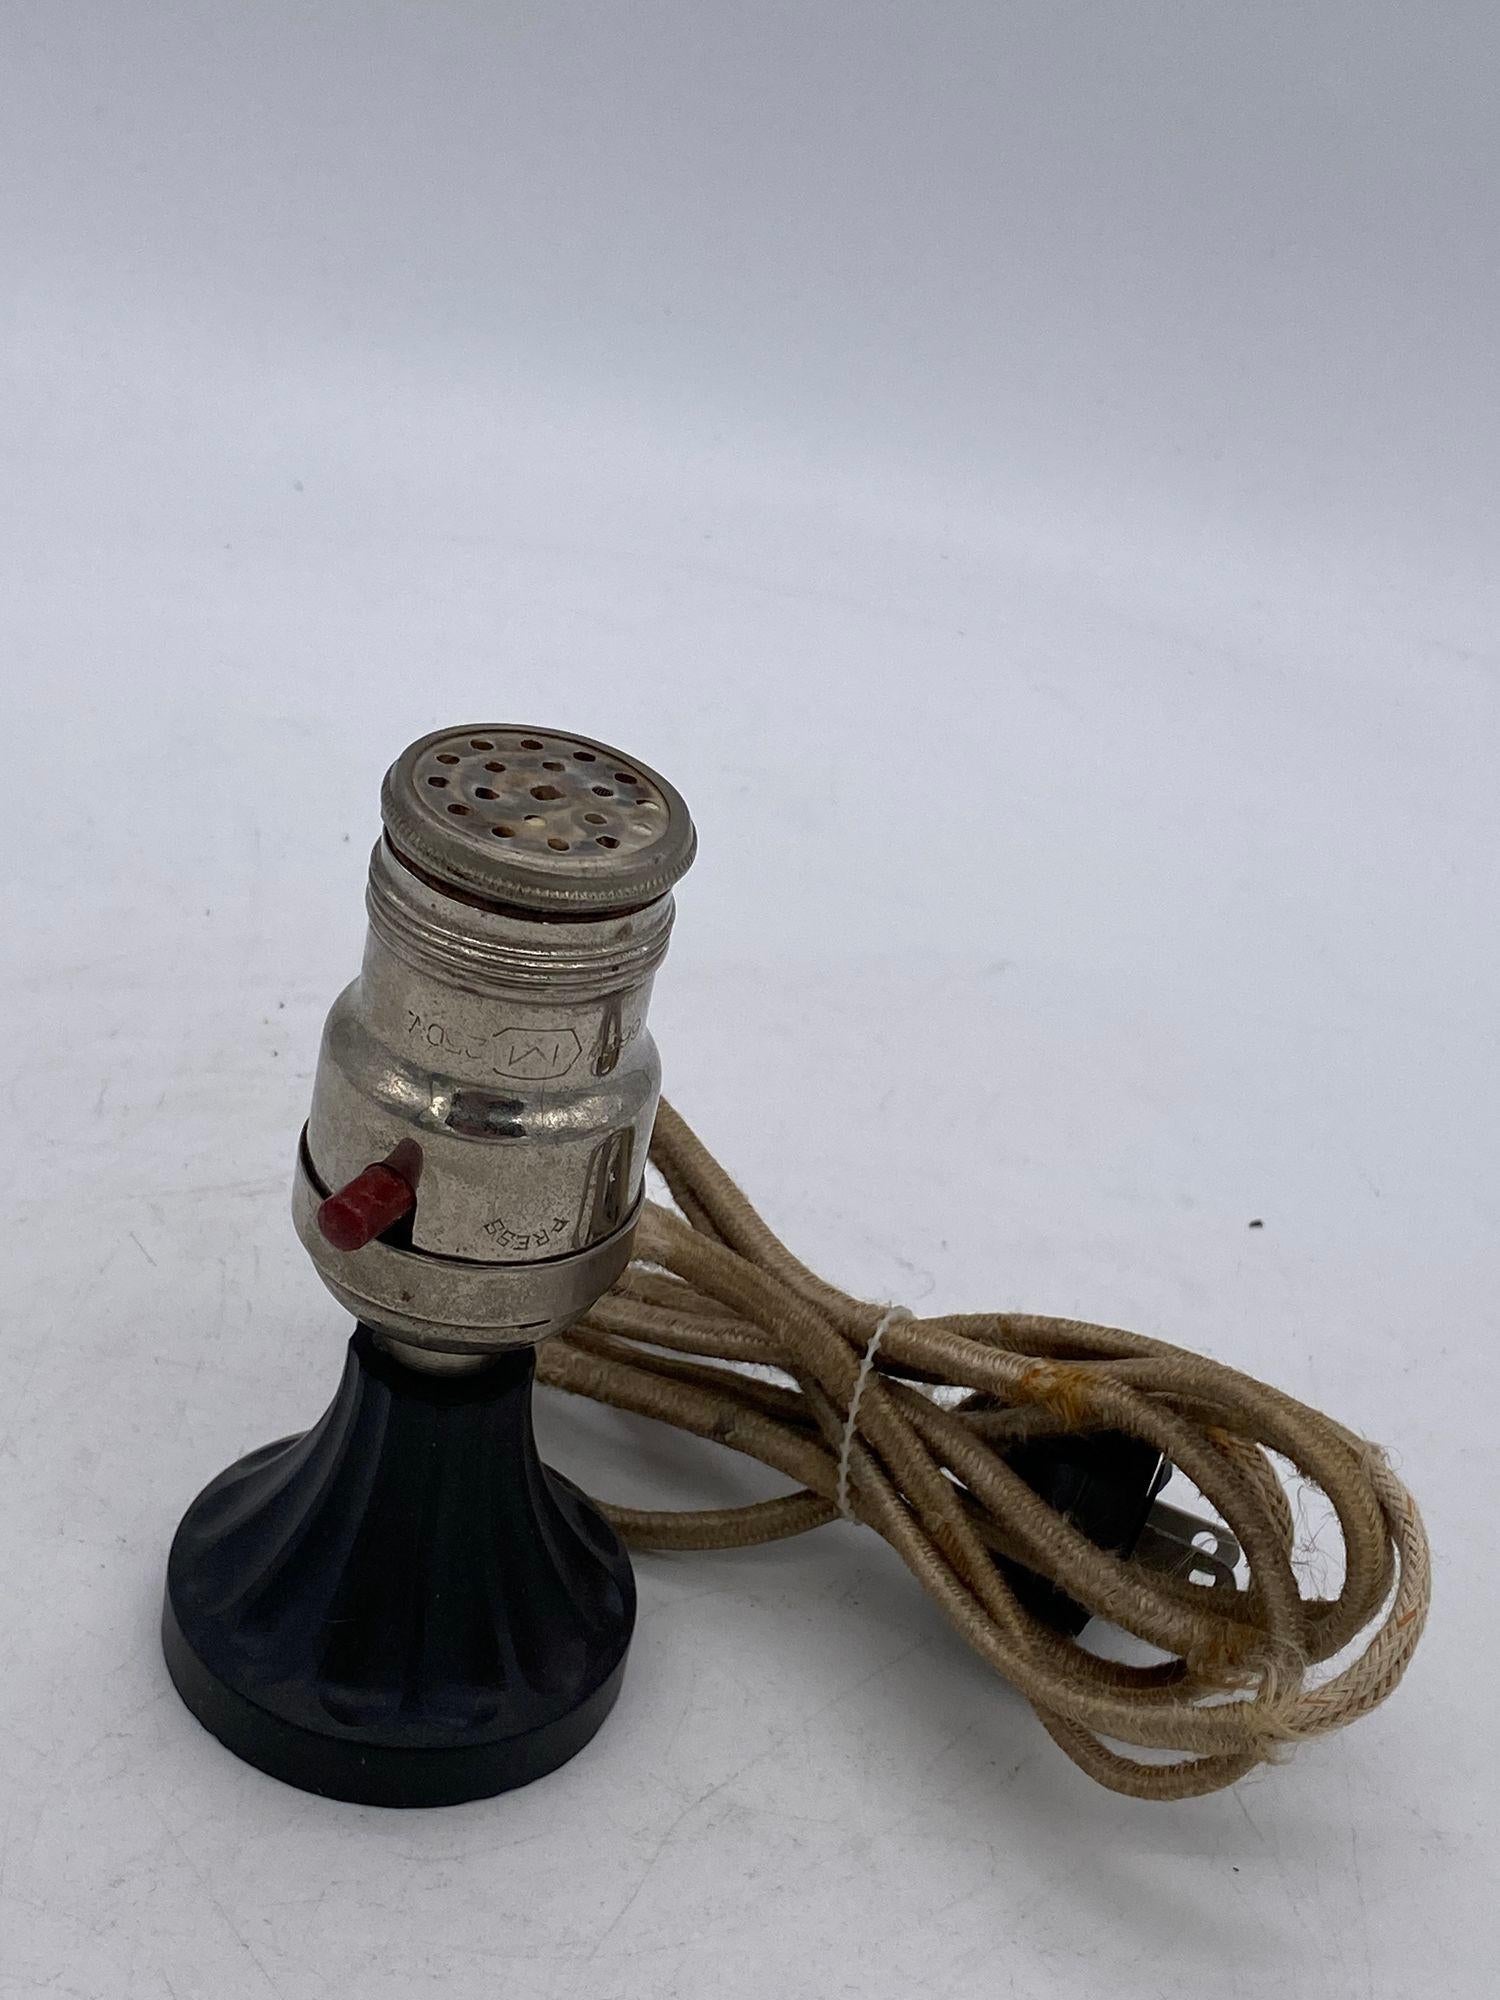 Pre-War Electric Lamp Base Lighter, featuring a modified lamp socket fixed with an electric lighter similar to car light.

Circa 1930